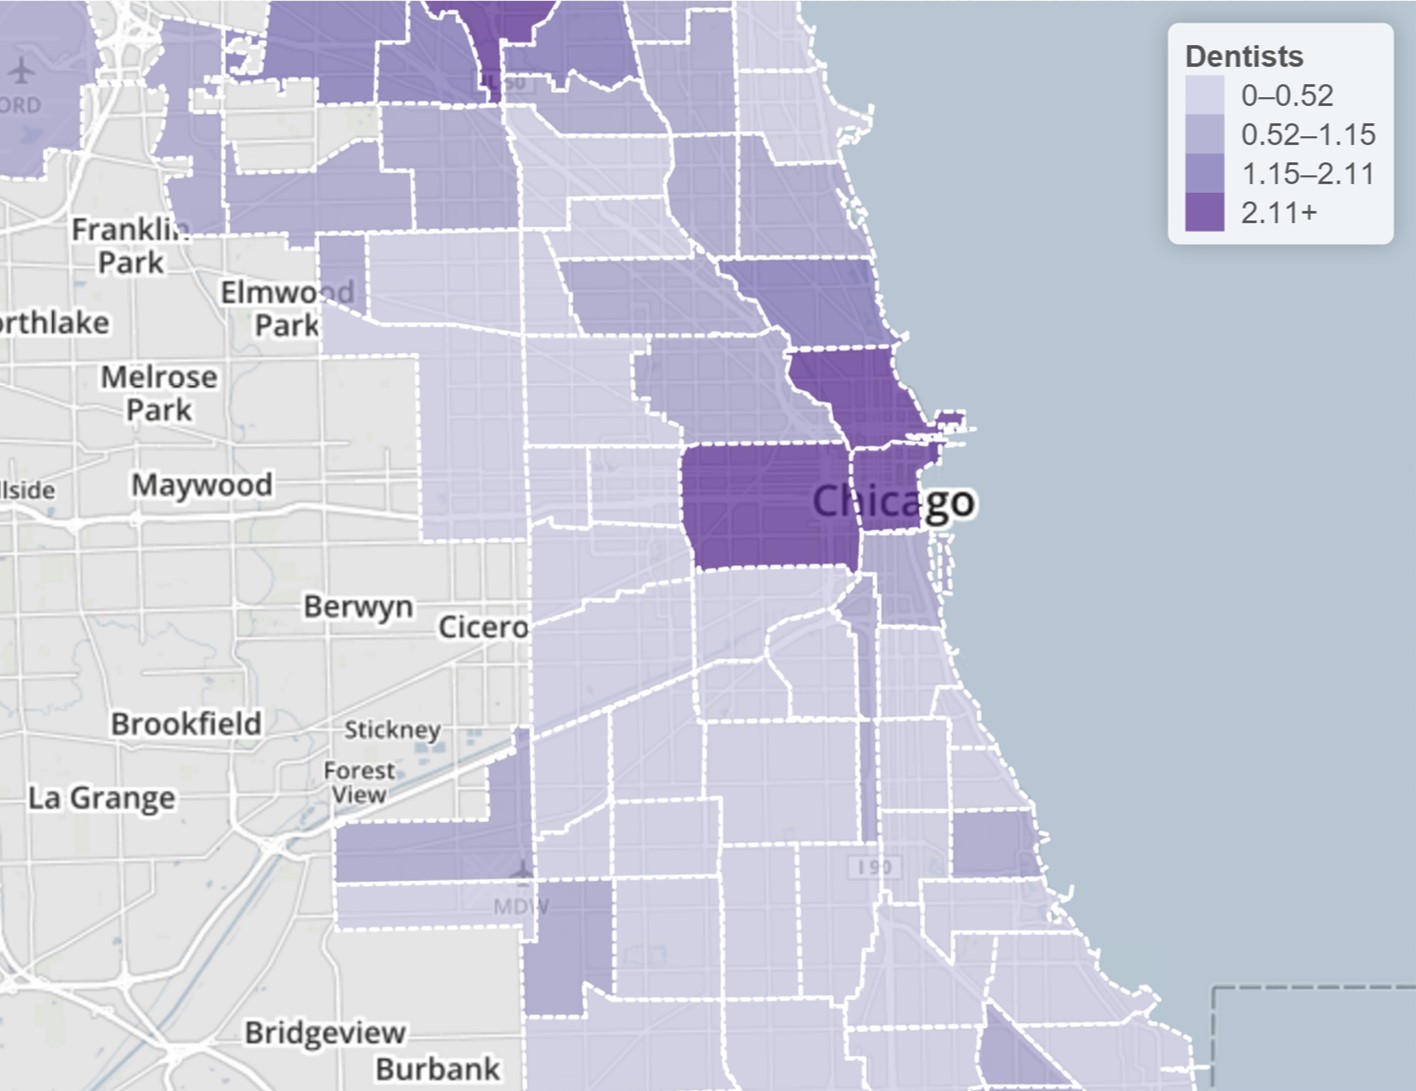 Practicing dentists per 1,000 residents by Chicago community area in 2010 - Courtesy of Chicago Health Atlas